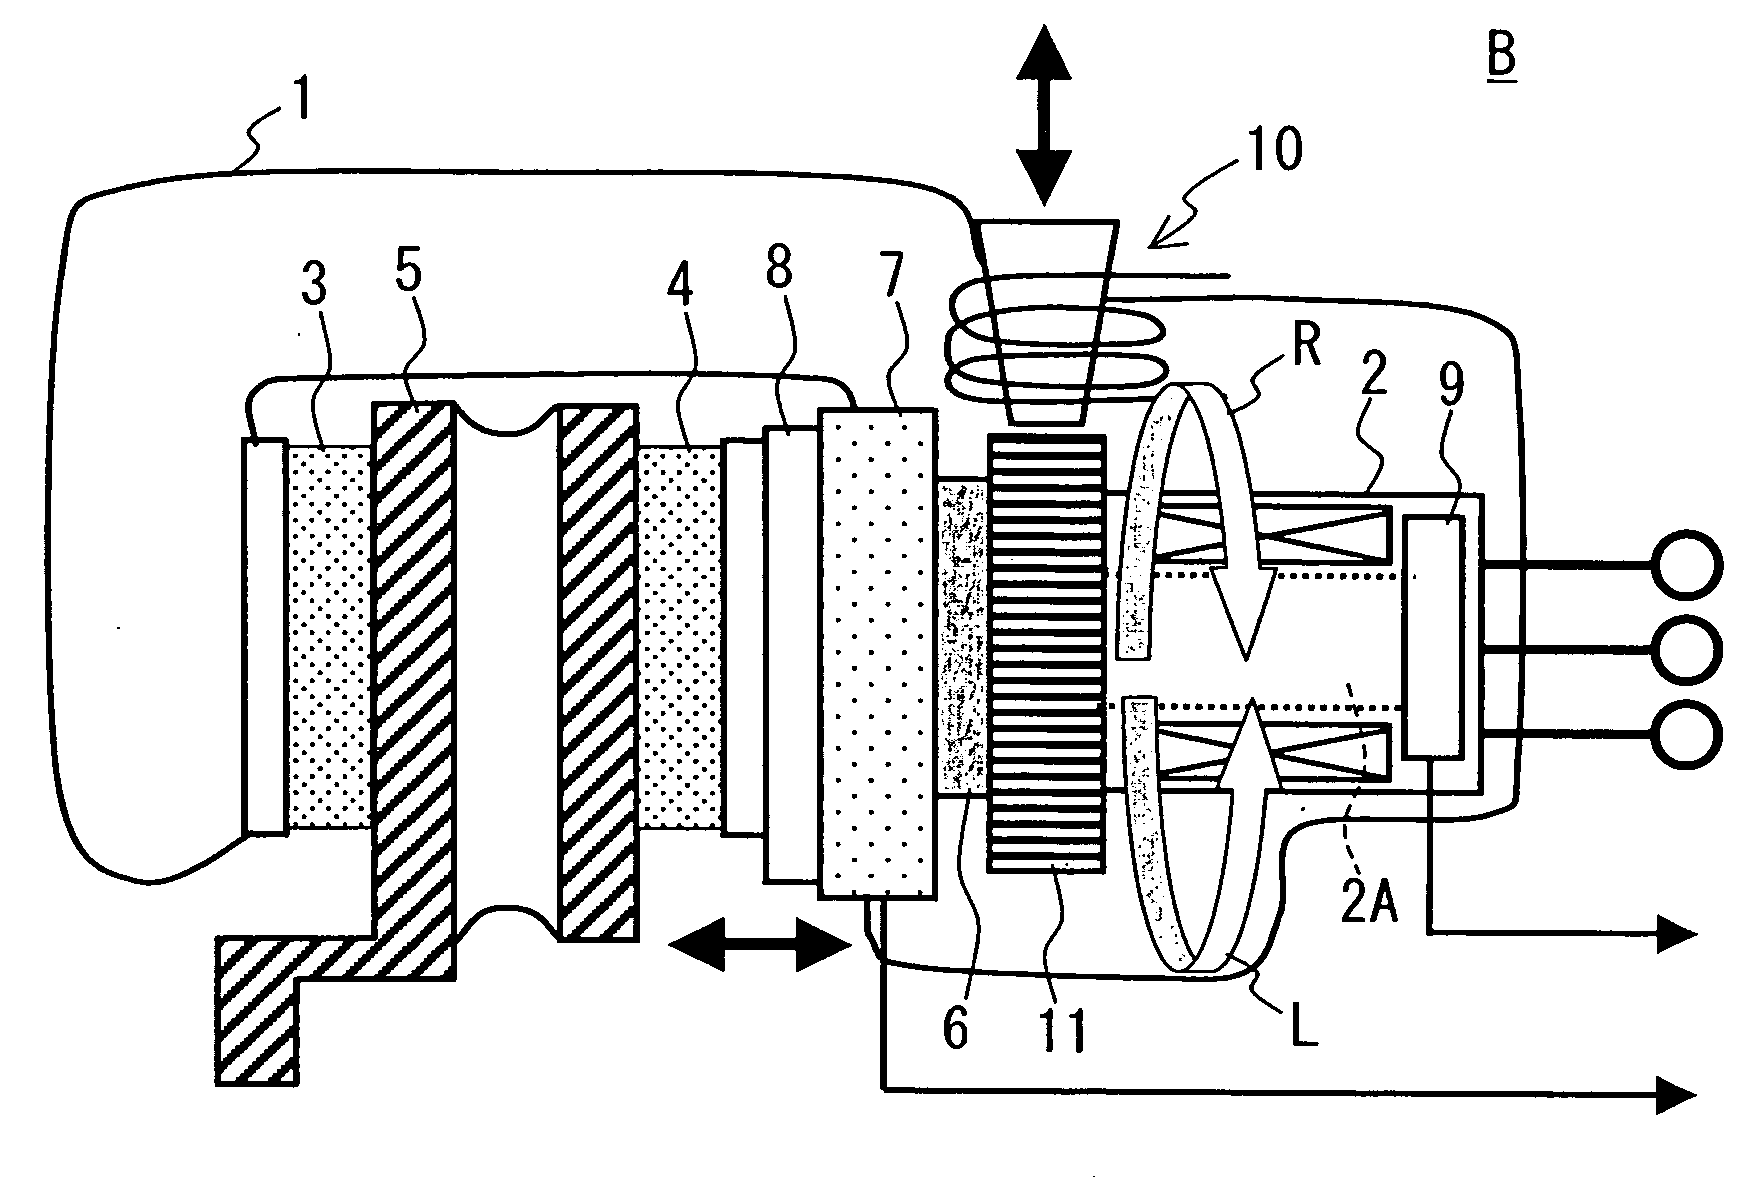 Electrically powered brake system and control unit for electrically powered brake system